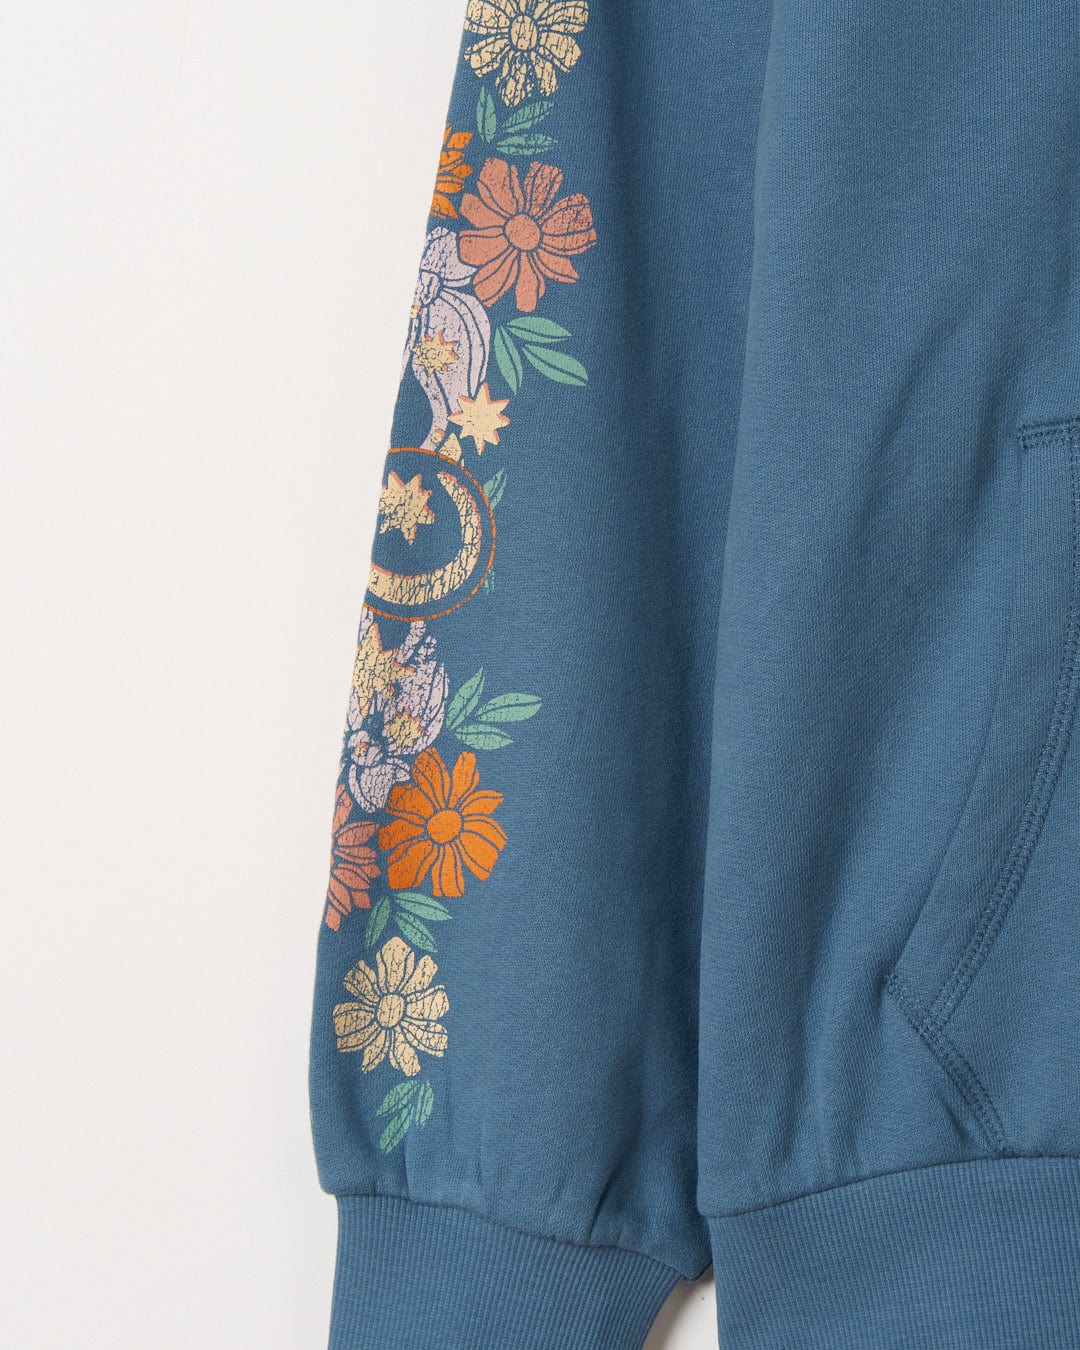 Blue Better Days - Womens Pop Hoodie with Luna embroidery on the sleeve by Saltrock.